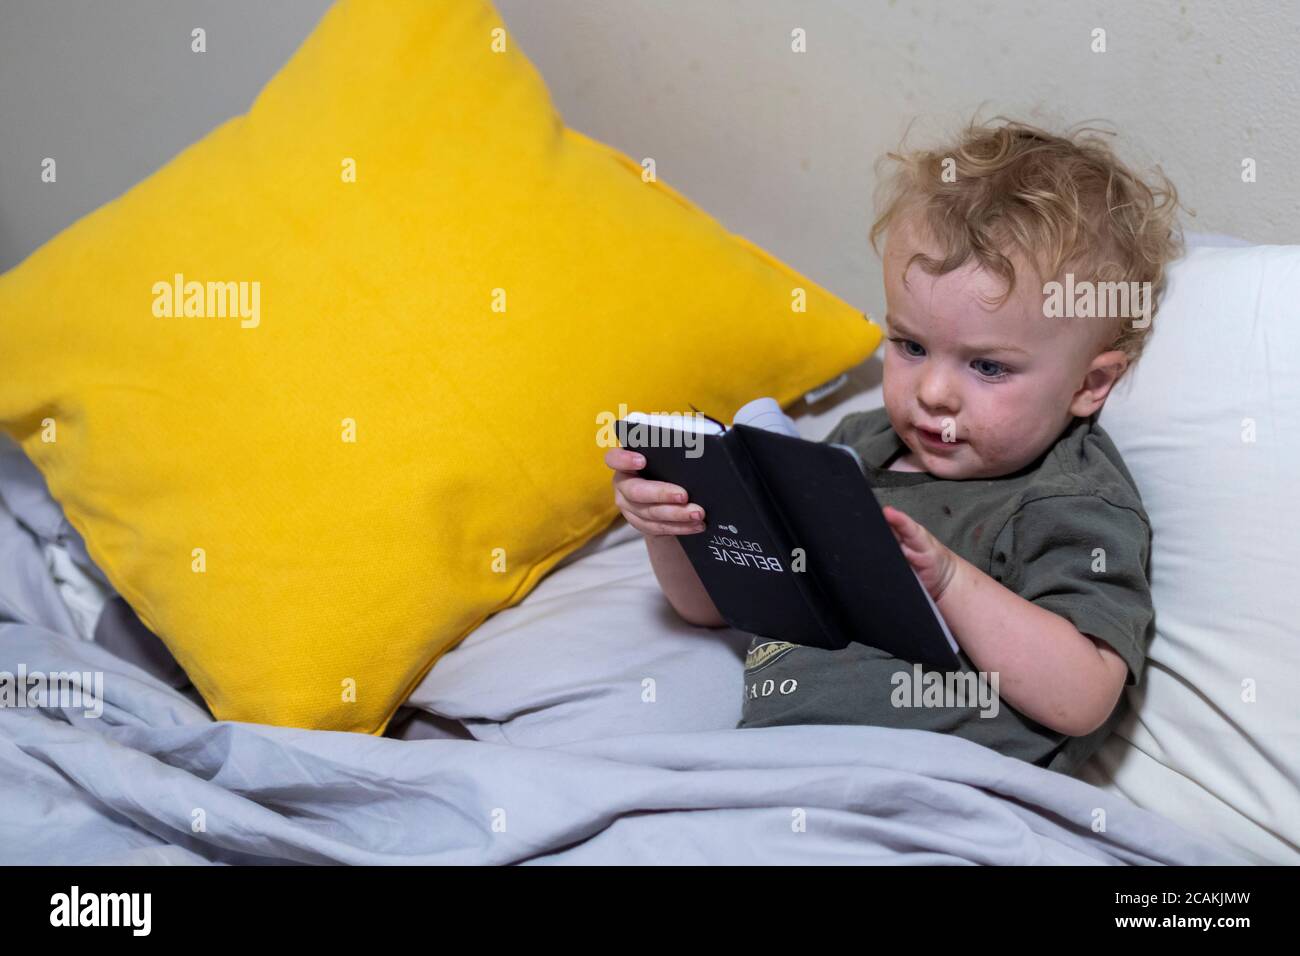 Denver, Colorado - Two-year-old Hendrix Hjermstad holds a book upside down as he pretends to read. Stock Photo